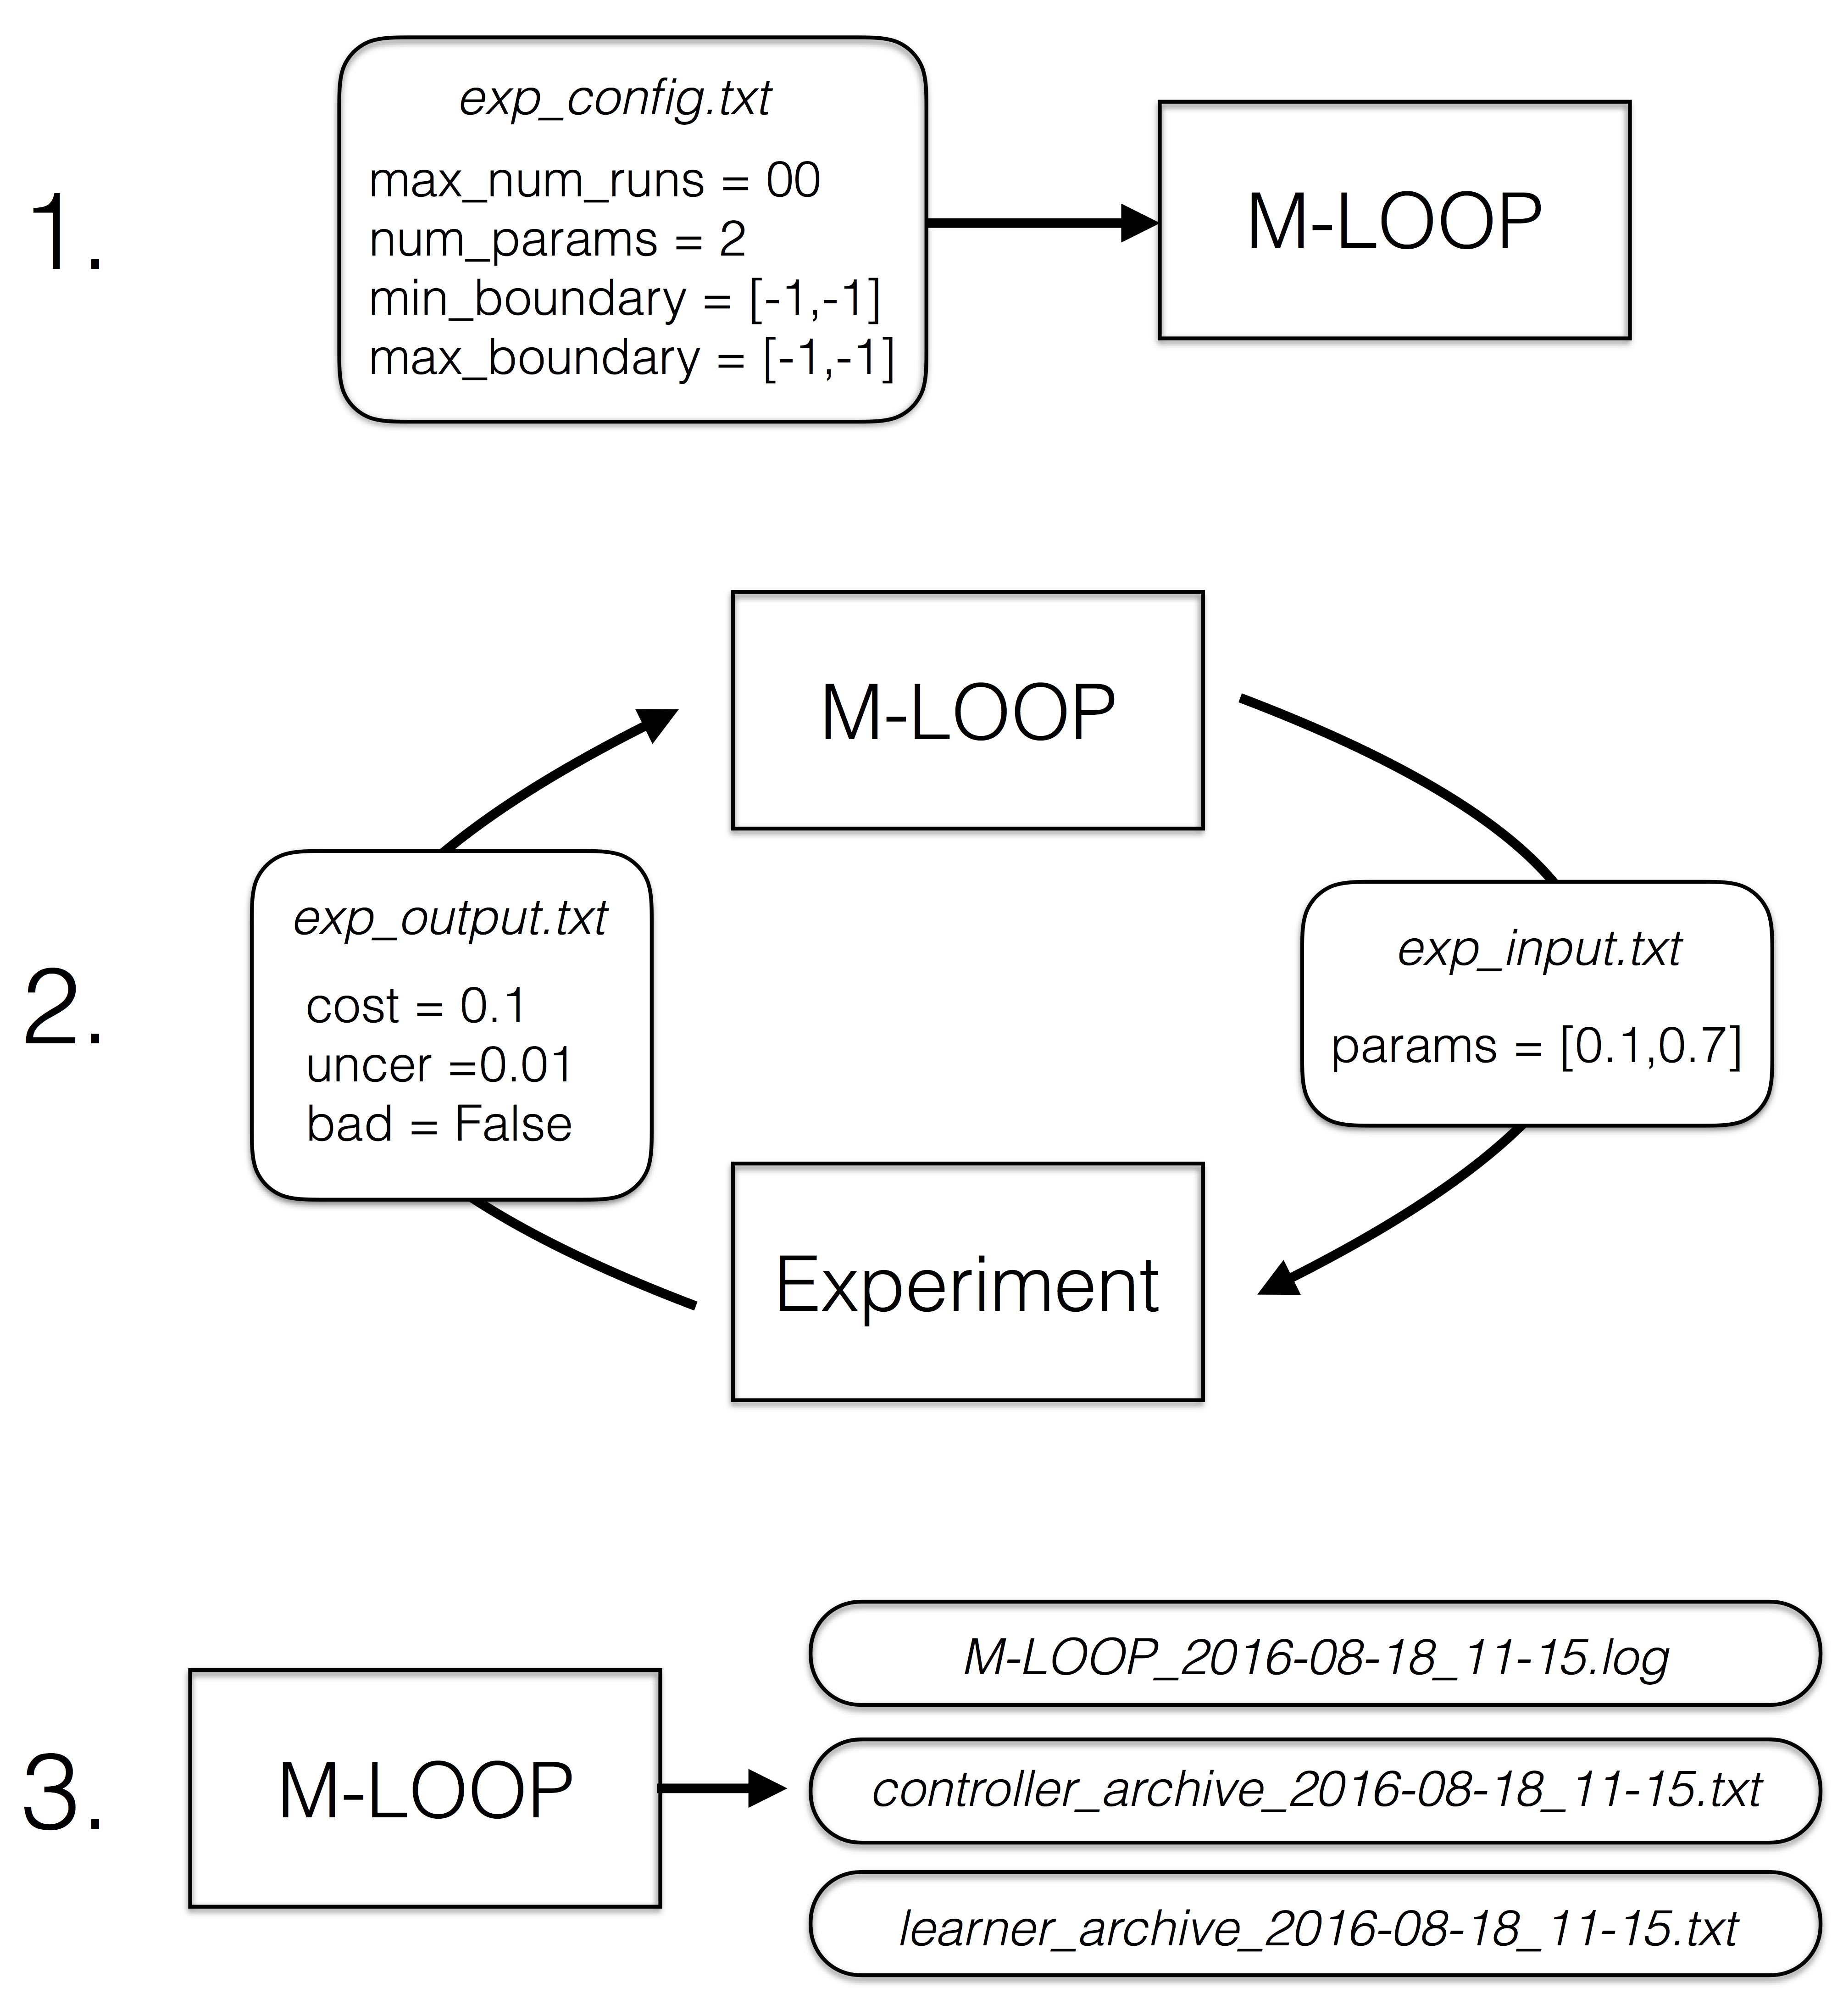 M-LOOP in a loop with an experiment sending parameters and receiving costs.